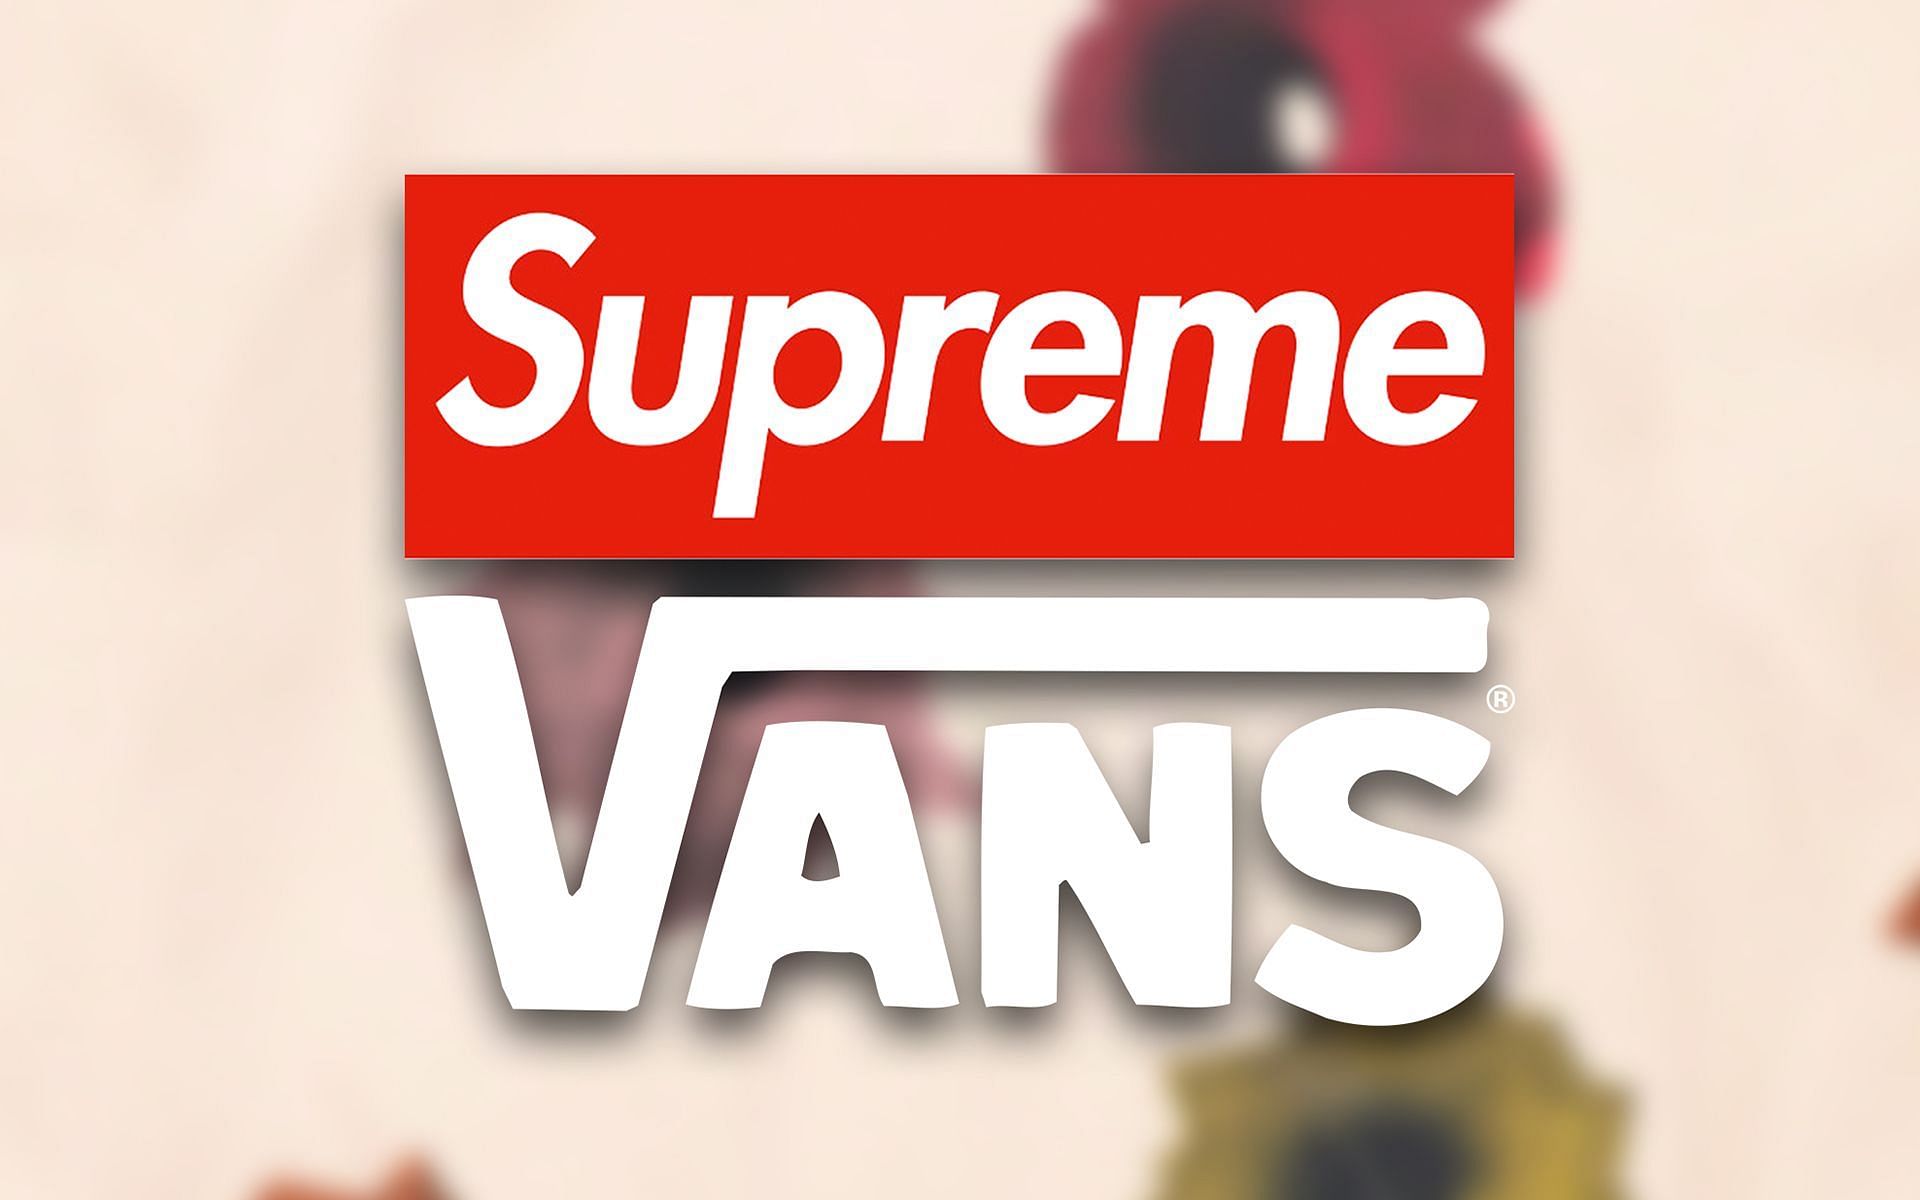 Supreme x Vans x Nate Lowman teamed up for the footwear collection (Image via Twitter/@supremedrops)